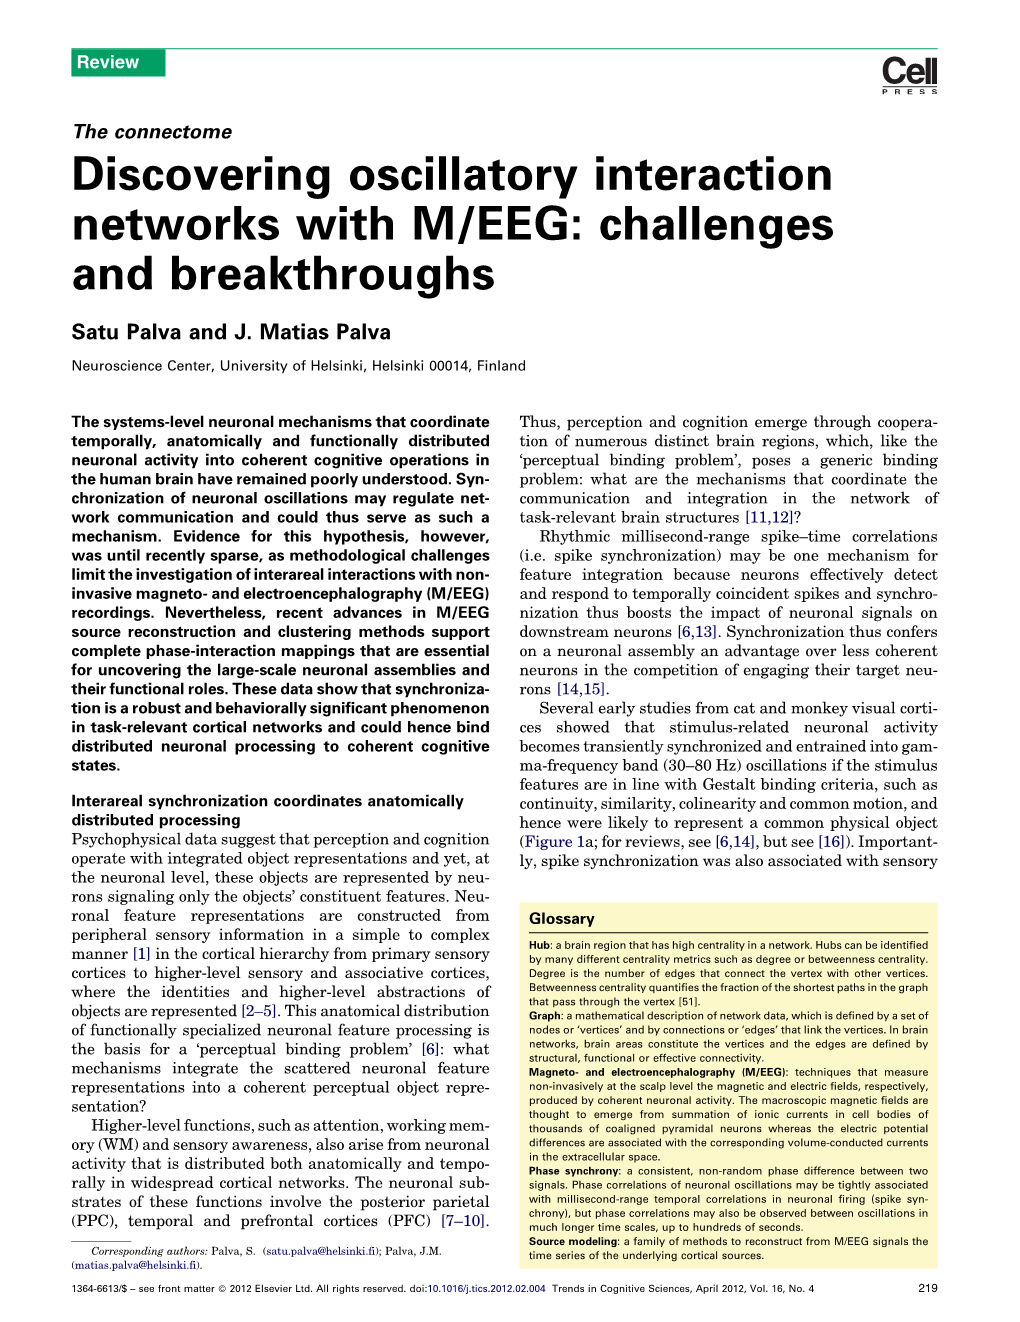 Discovering Oscillatory Interaction Networks with M/EEG